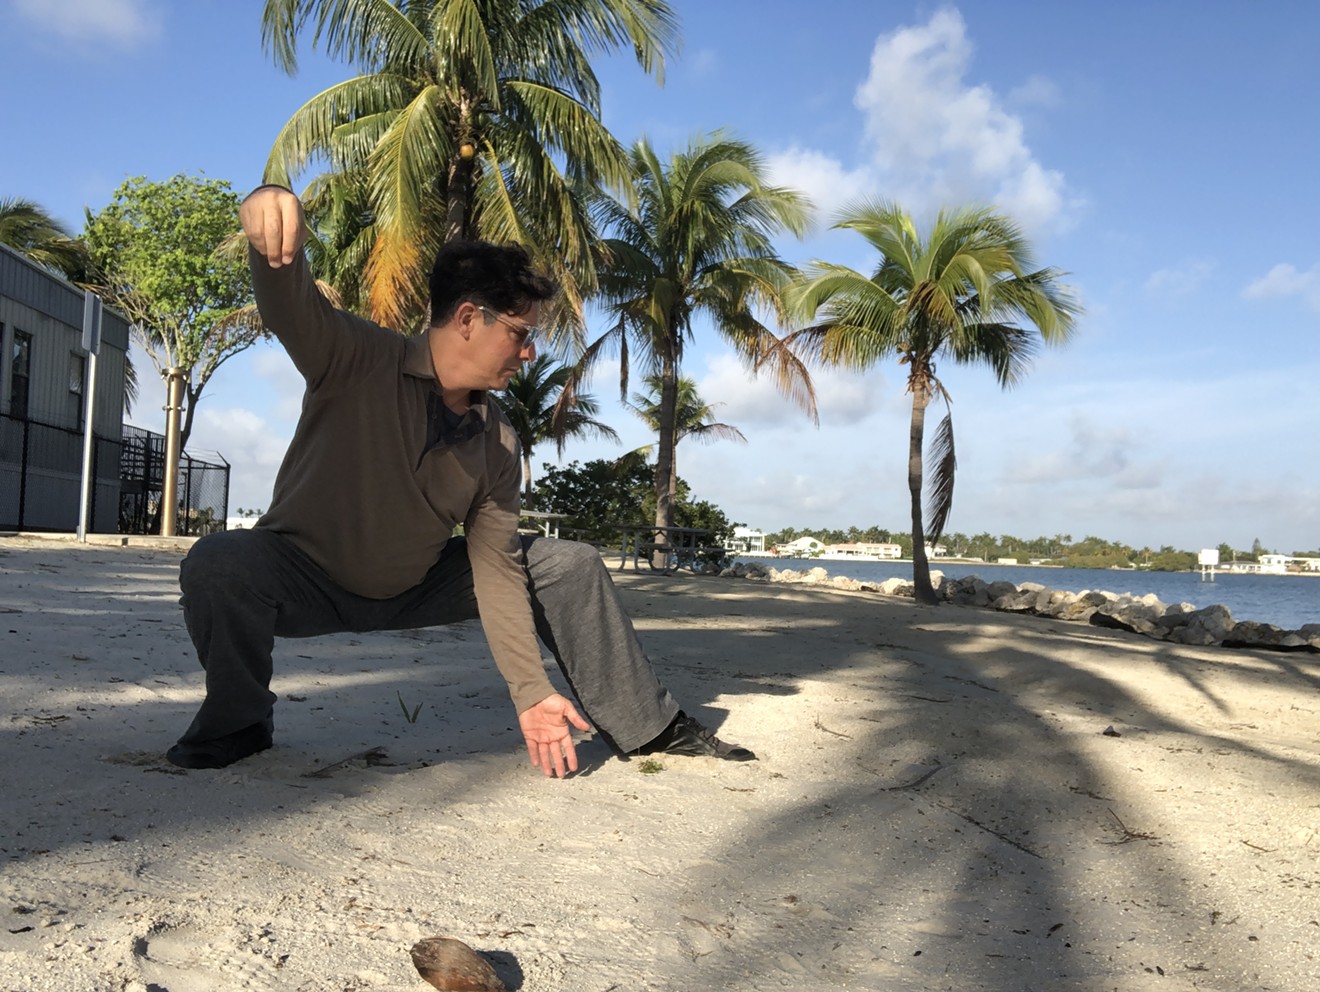 Oliver Pfeffer is the founder of Pelican Harbor Tai Chi, where he teaches weekly classes at the Miami Shores Community Center.